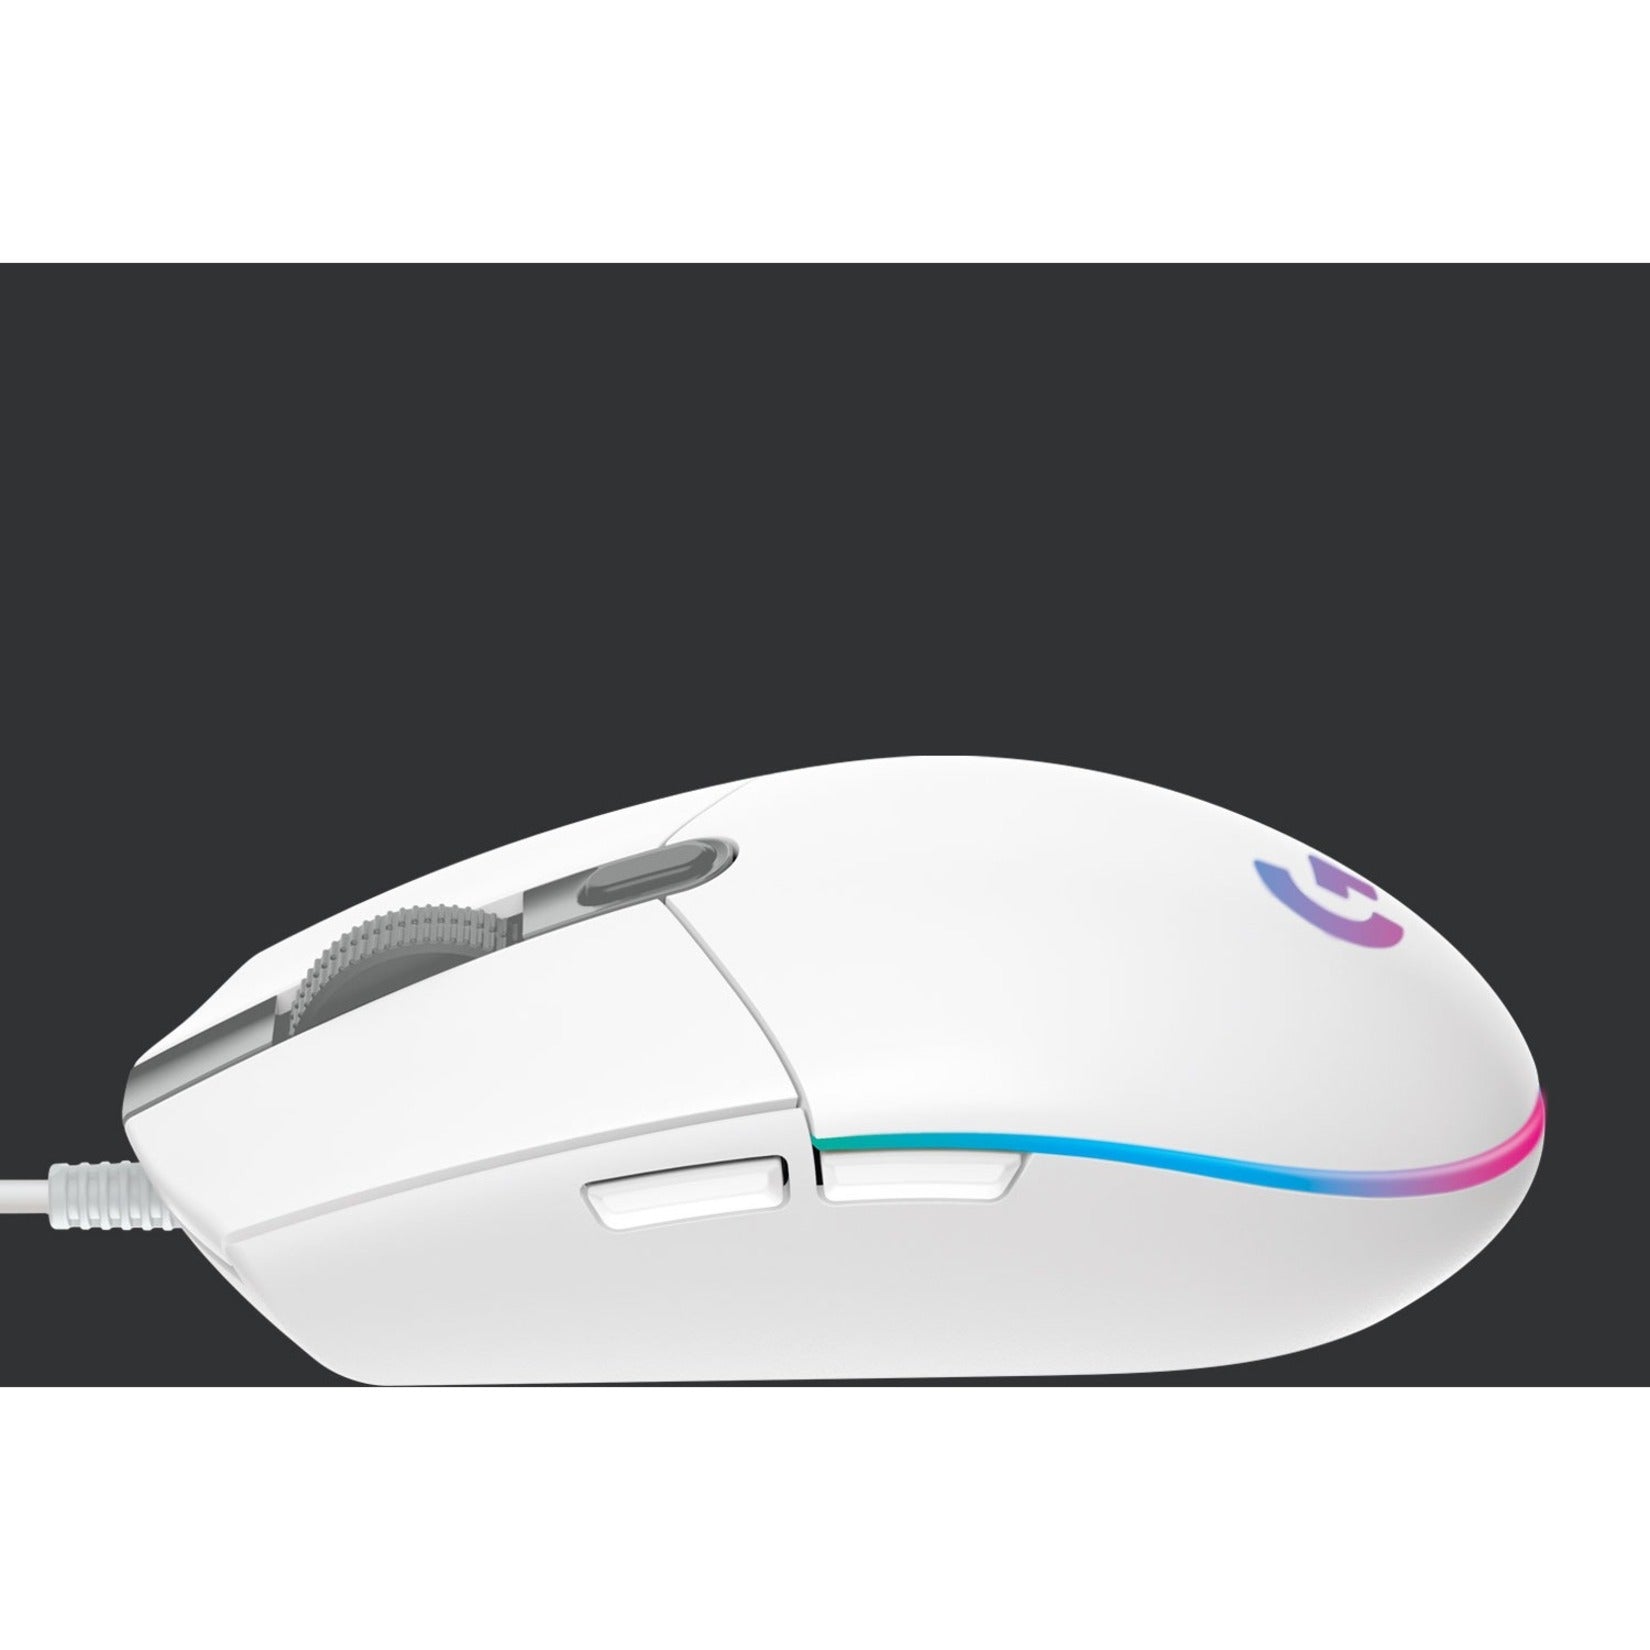 Logitech 910-005791 G203 Gaming Mouse, 6 Buttons, 8000 dpi, USB Wired, White